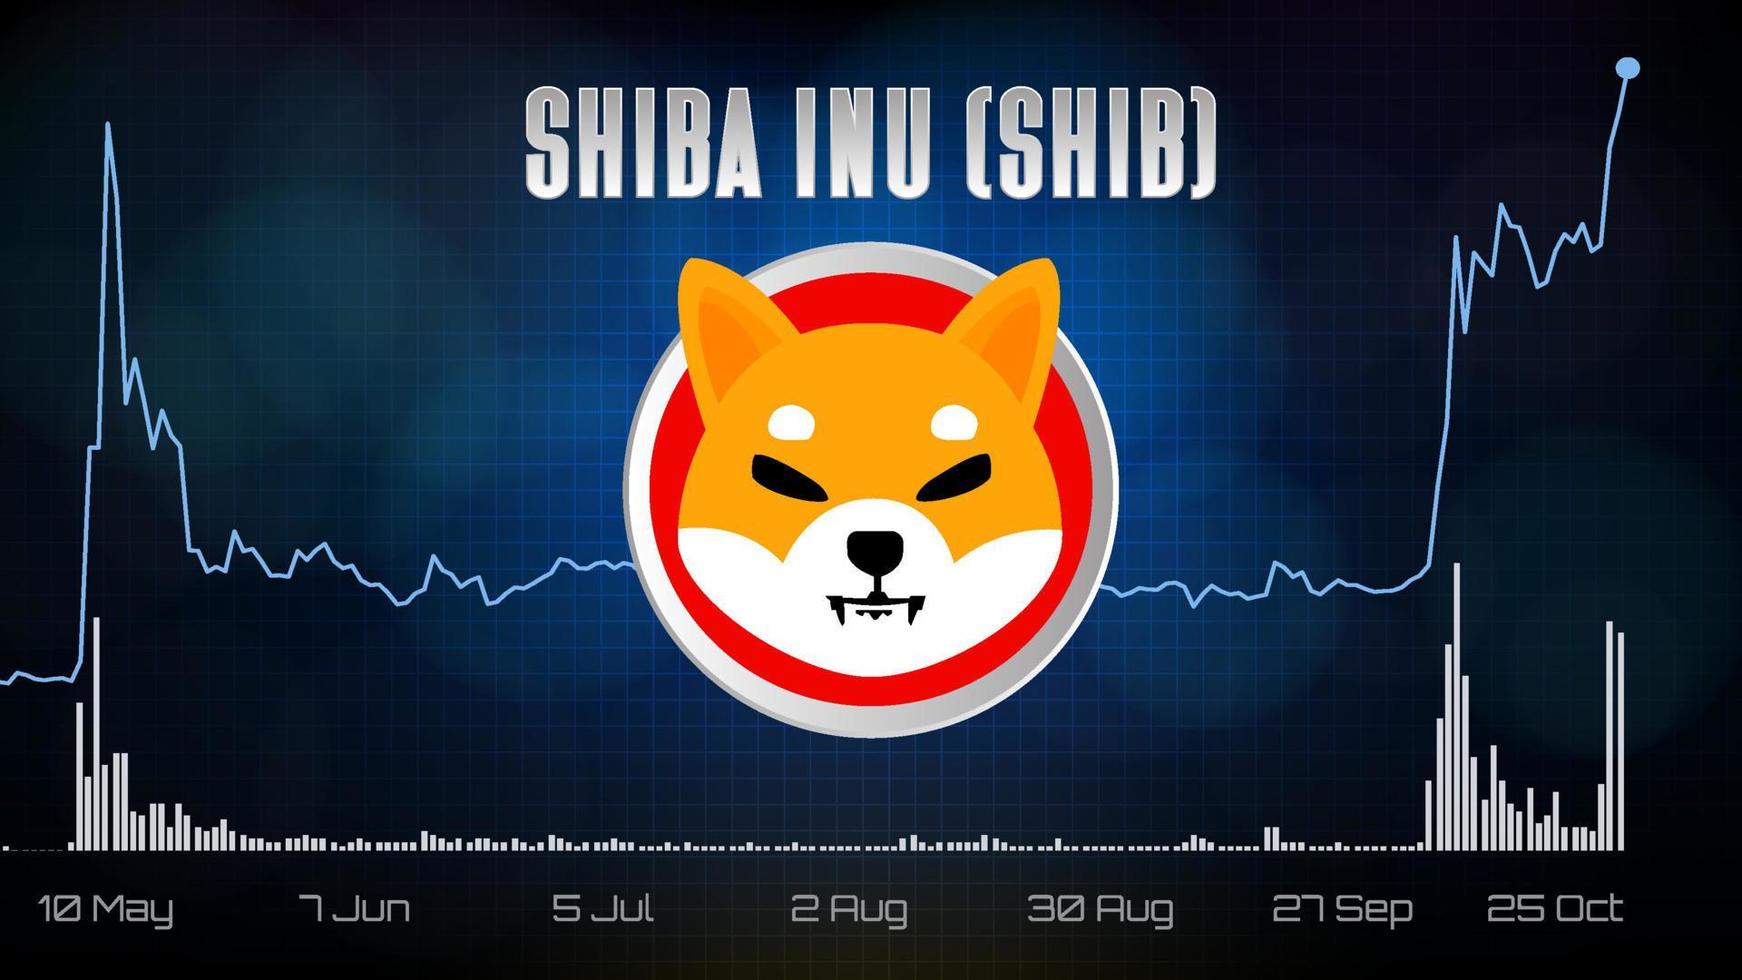 abstract futuristic technology background of Shiba Inu SHIB Price Chart coin digital cryptocurrency vector